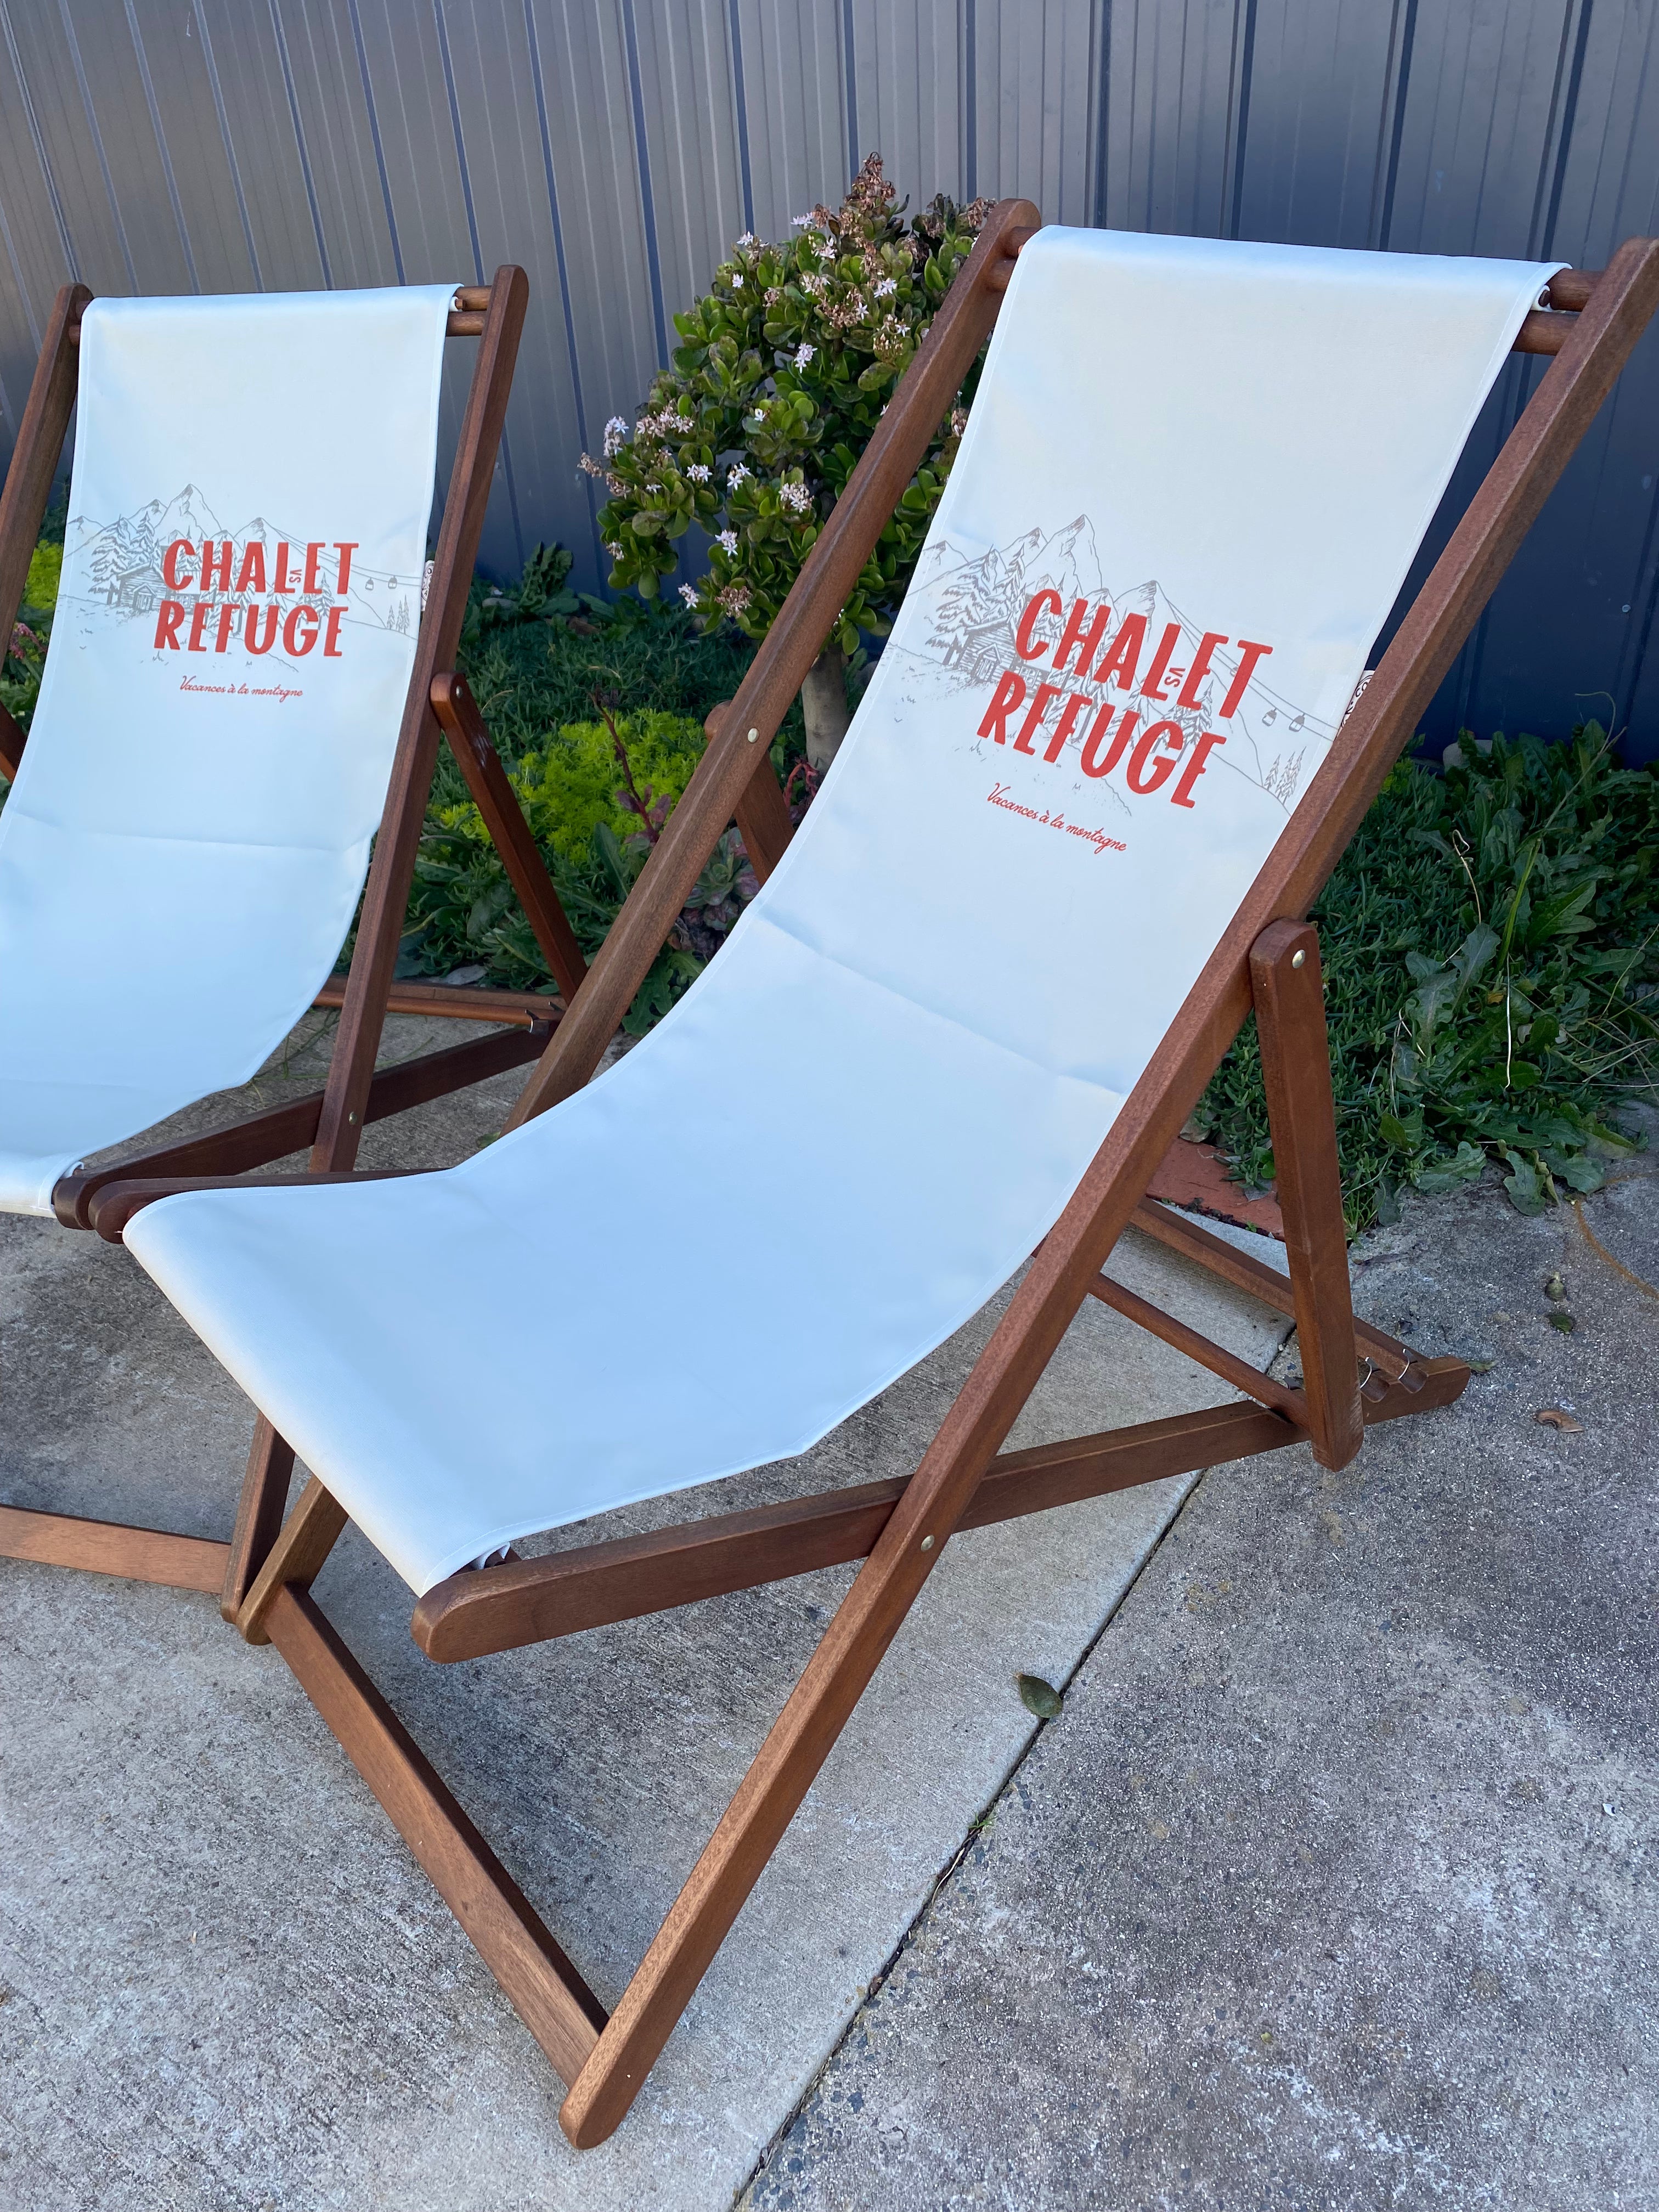 Pair of Coast & Valley Deck Chairs: Chalet vs Refuge design showing words in red with a grey grey chalet surrounded by trees on a plain cream background. 2 chairs side on view. On a concrete floor against a blue steel shed and door with garden bed in the background.